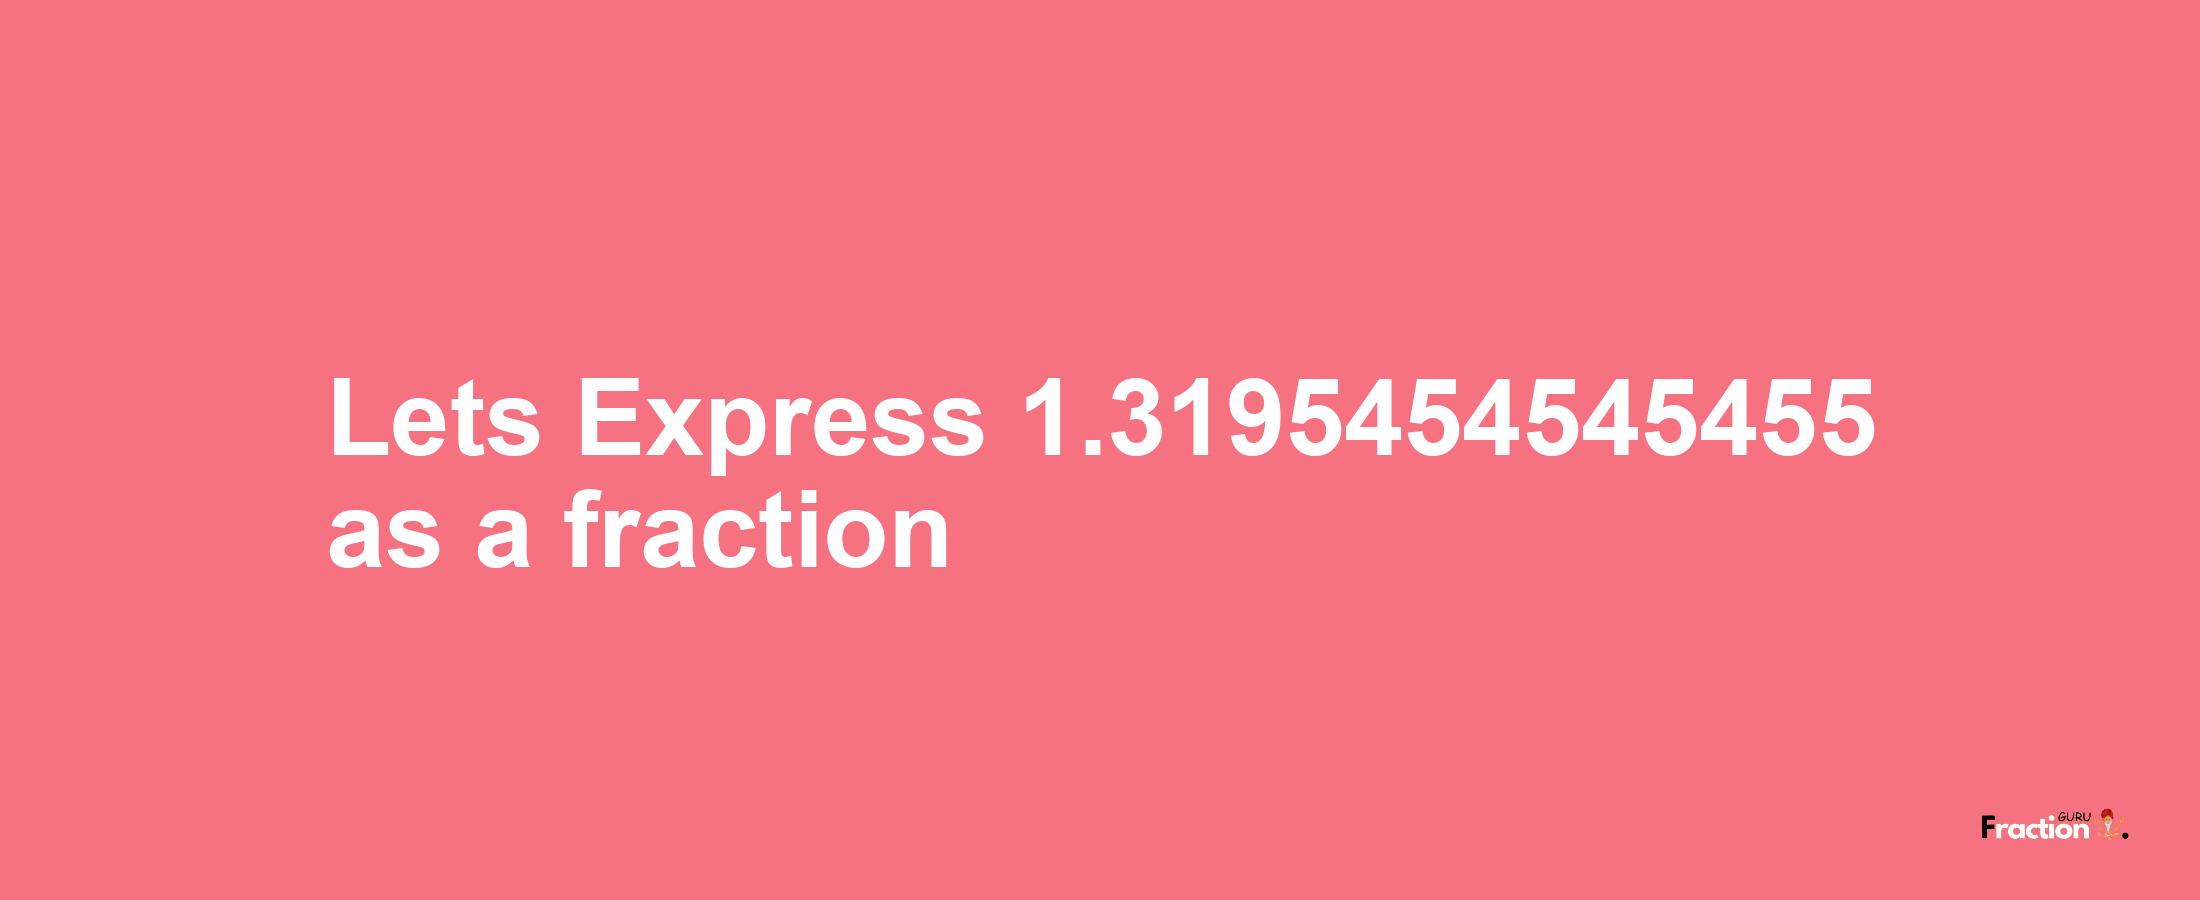 Lets Express 1.3195454545455 as afraction